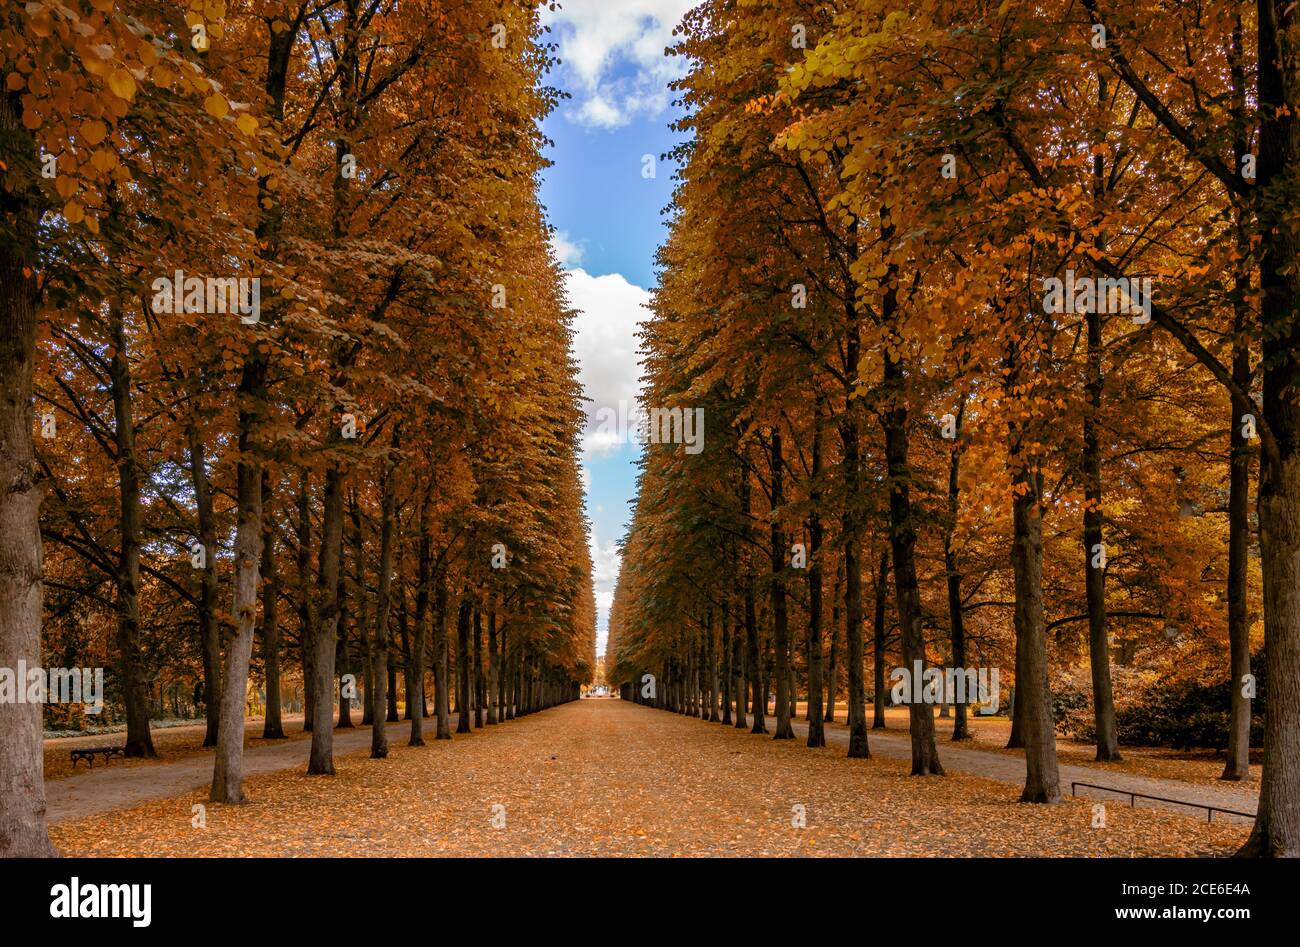 A beautiful endless alley of tall trees lead to the horizon in autumn Stock Photo